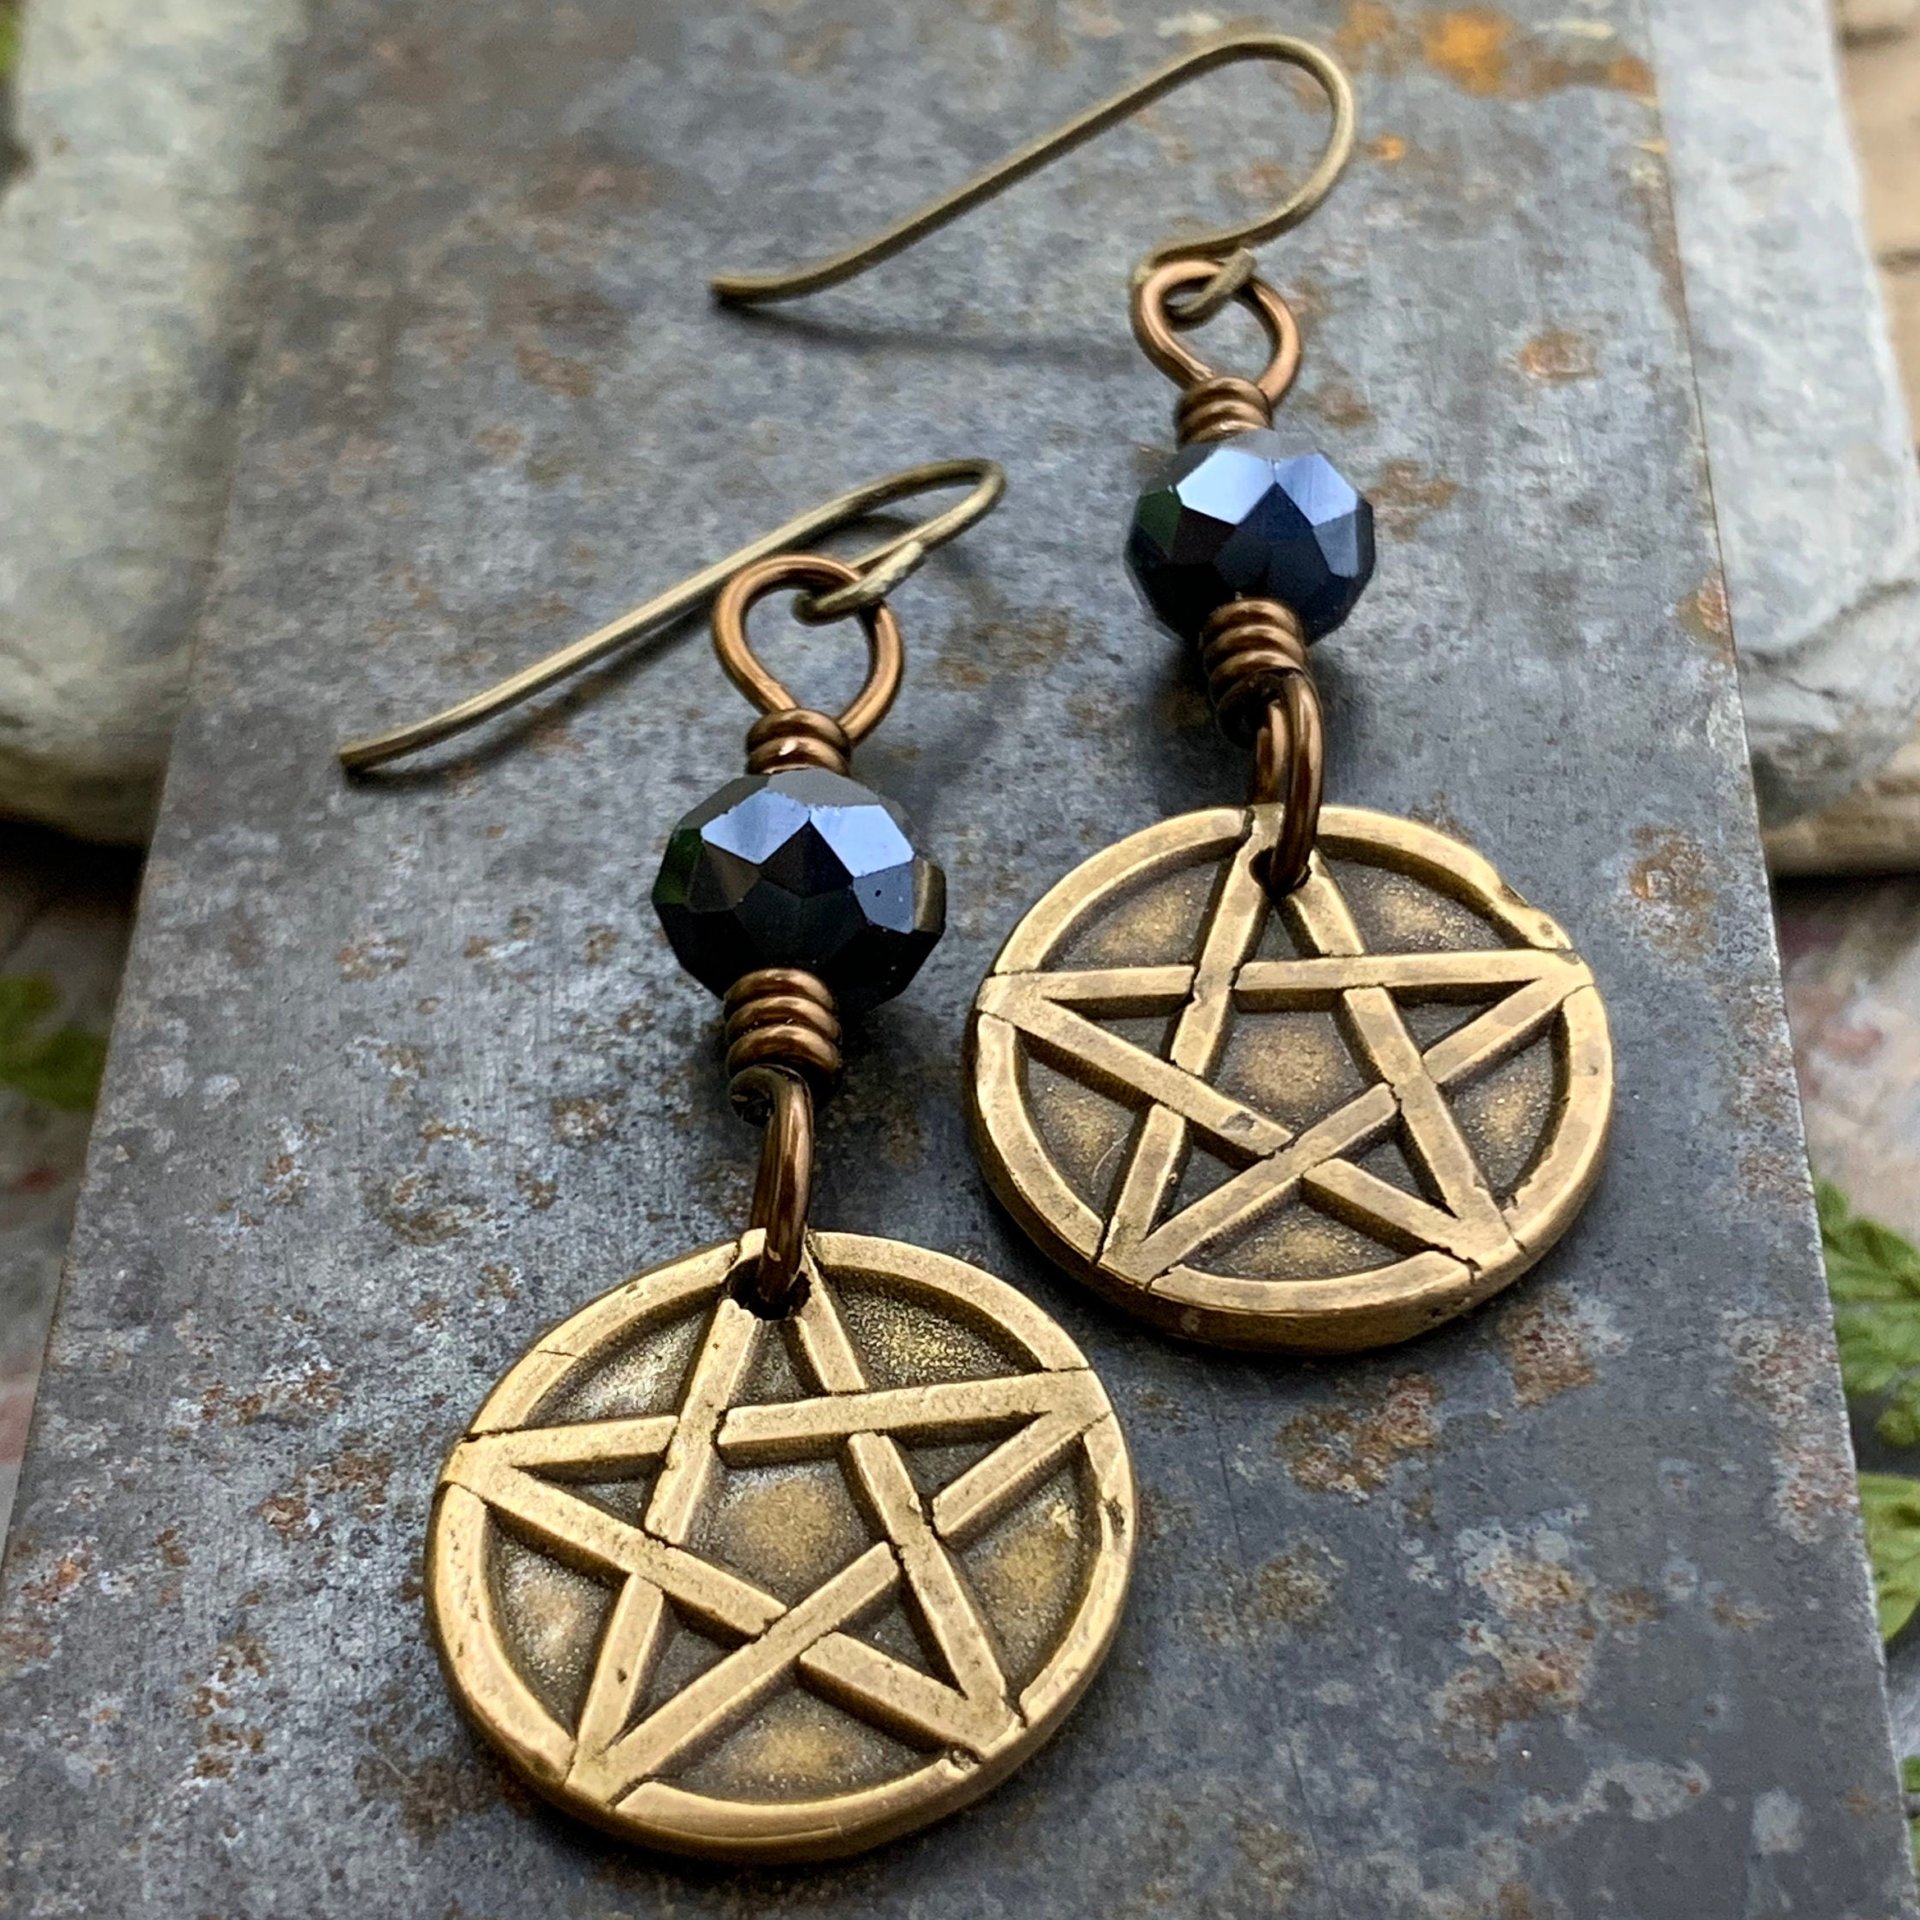 Pentagram Bronze Earrings, Pentacle, Wicca Pagan, Crystals Beads, 5 Elements, Witch Jewelry, Hypoallergenic Ear Wires, Soul Harbor Jewelry